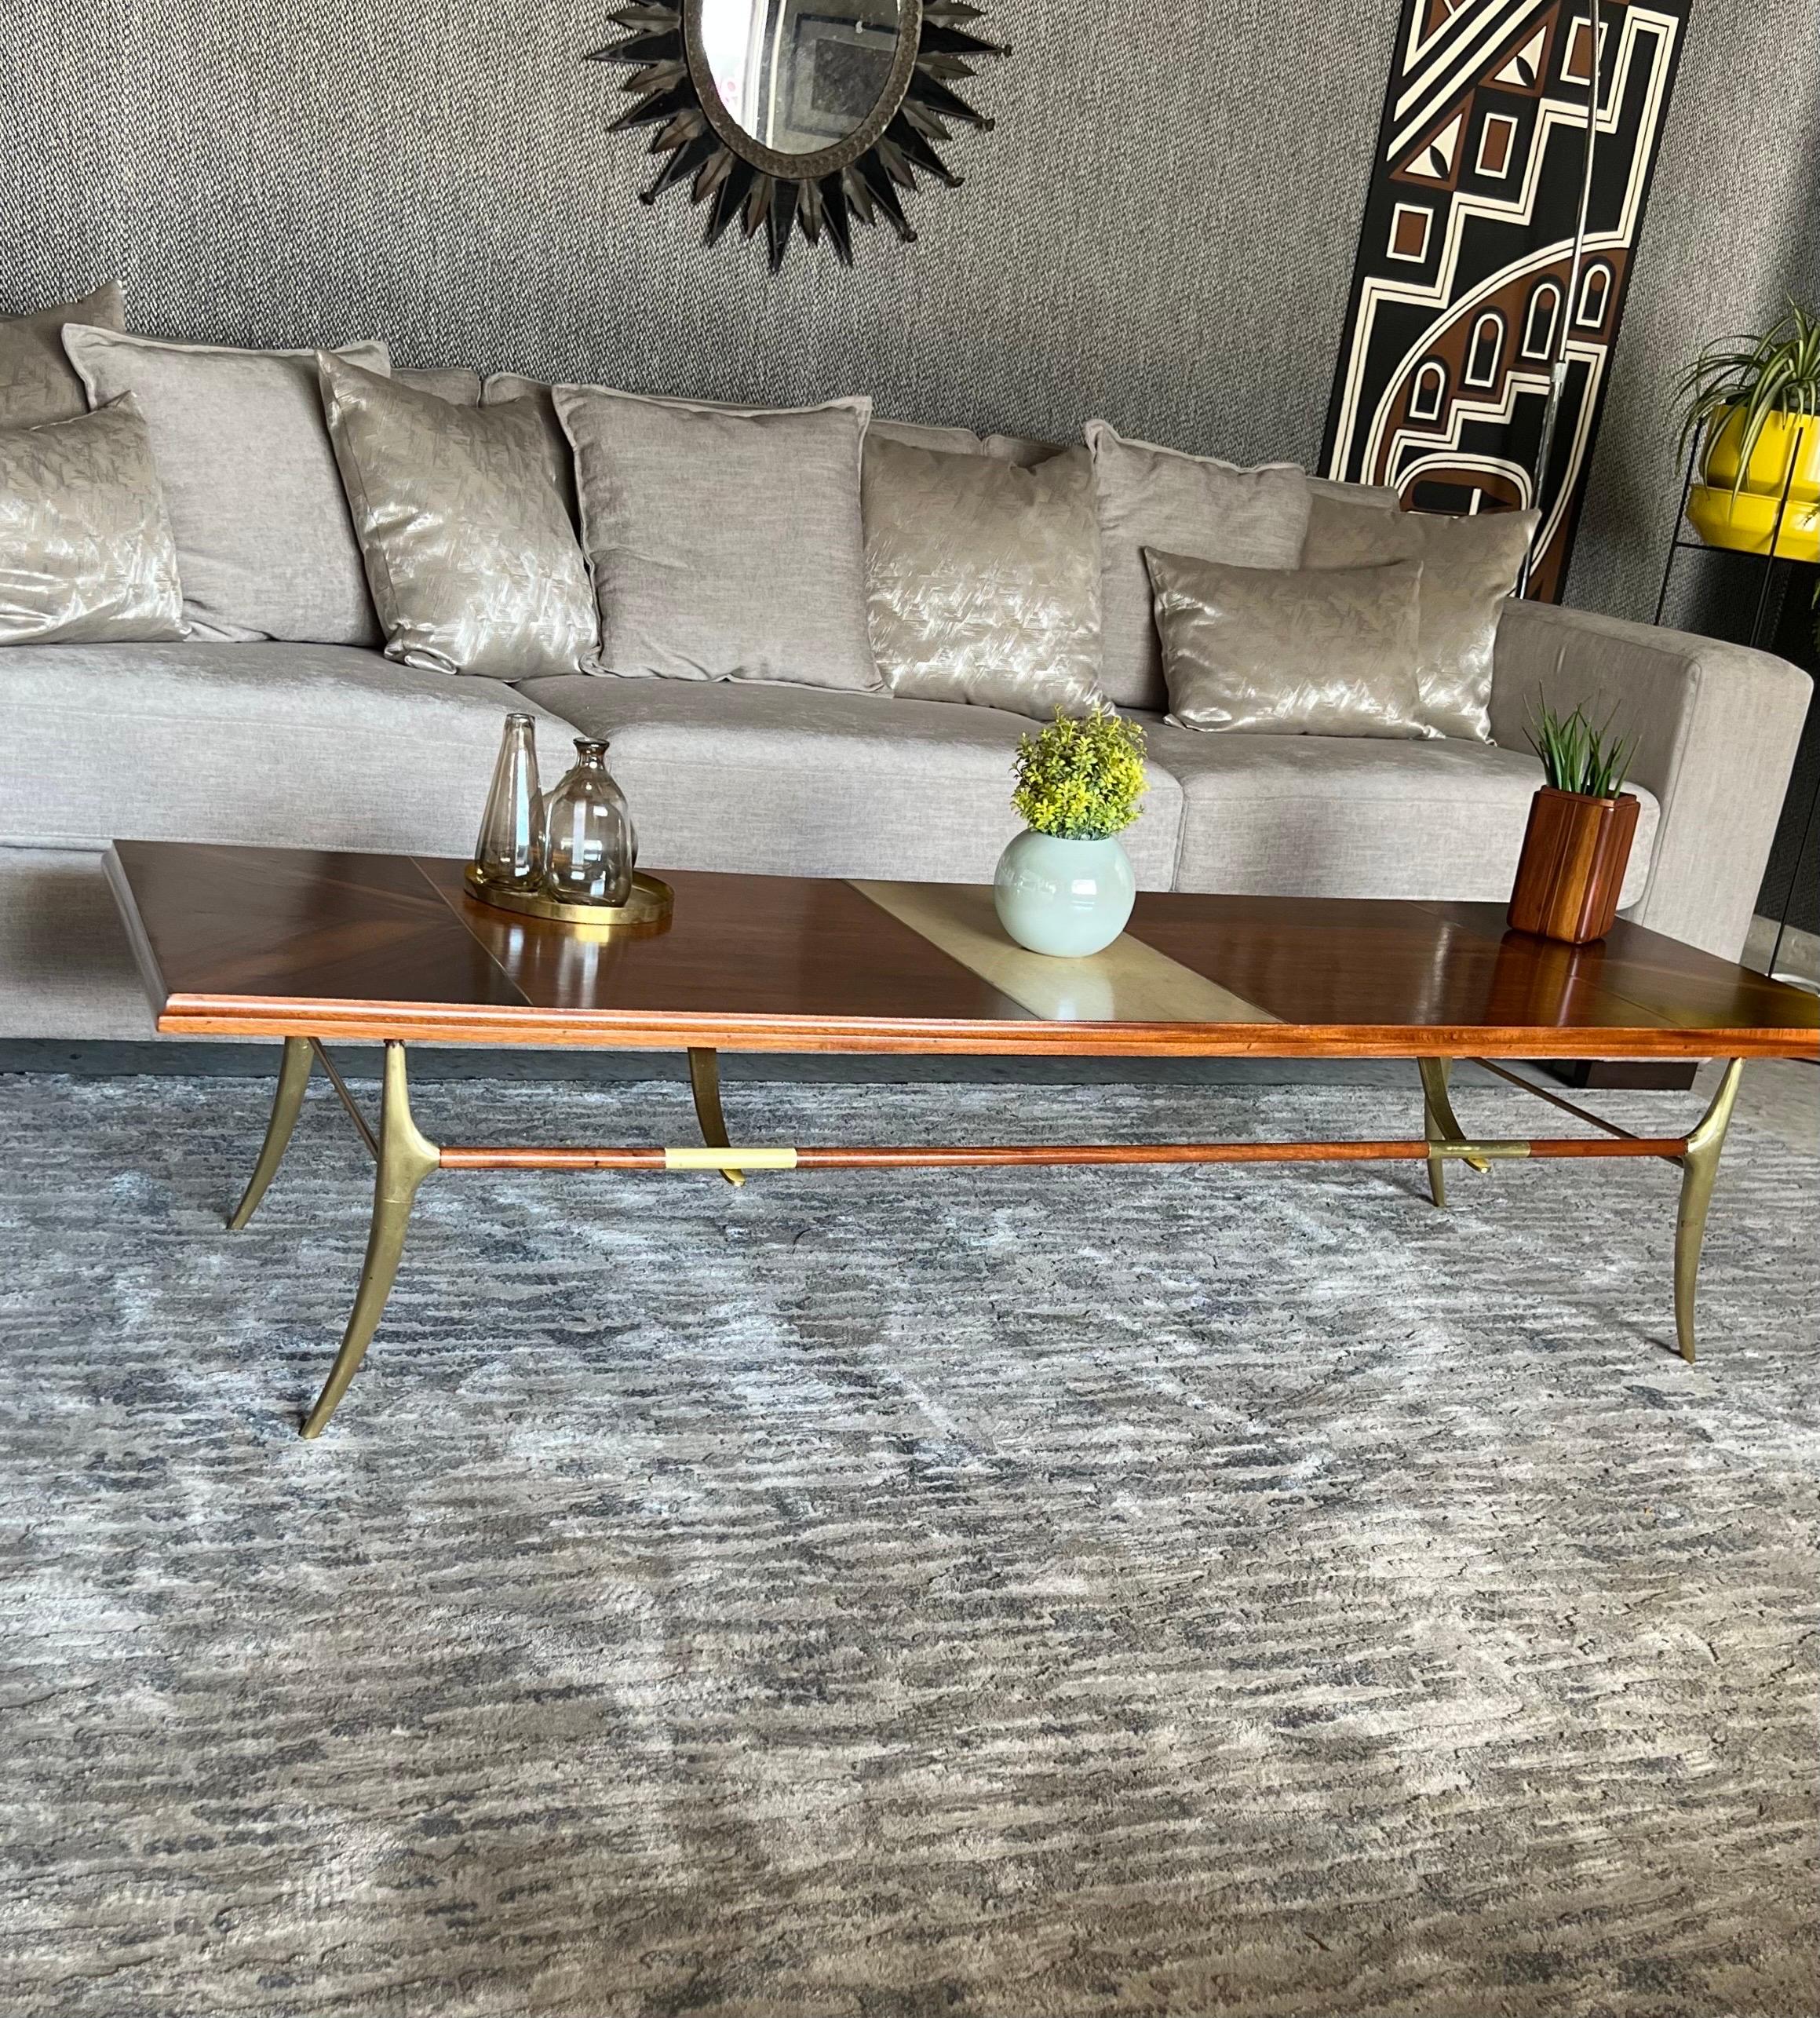 Classic mid-century modern coffee table, professionally restored by our master craftsmen in our workshop, it has minimal details that time marked but that give that character and essence to our vintage pieces.
We can gladly send more photos or video